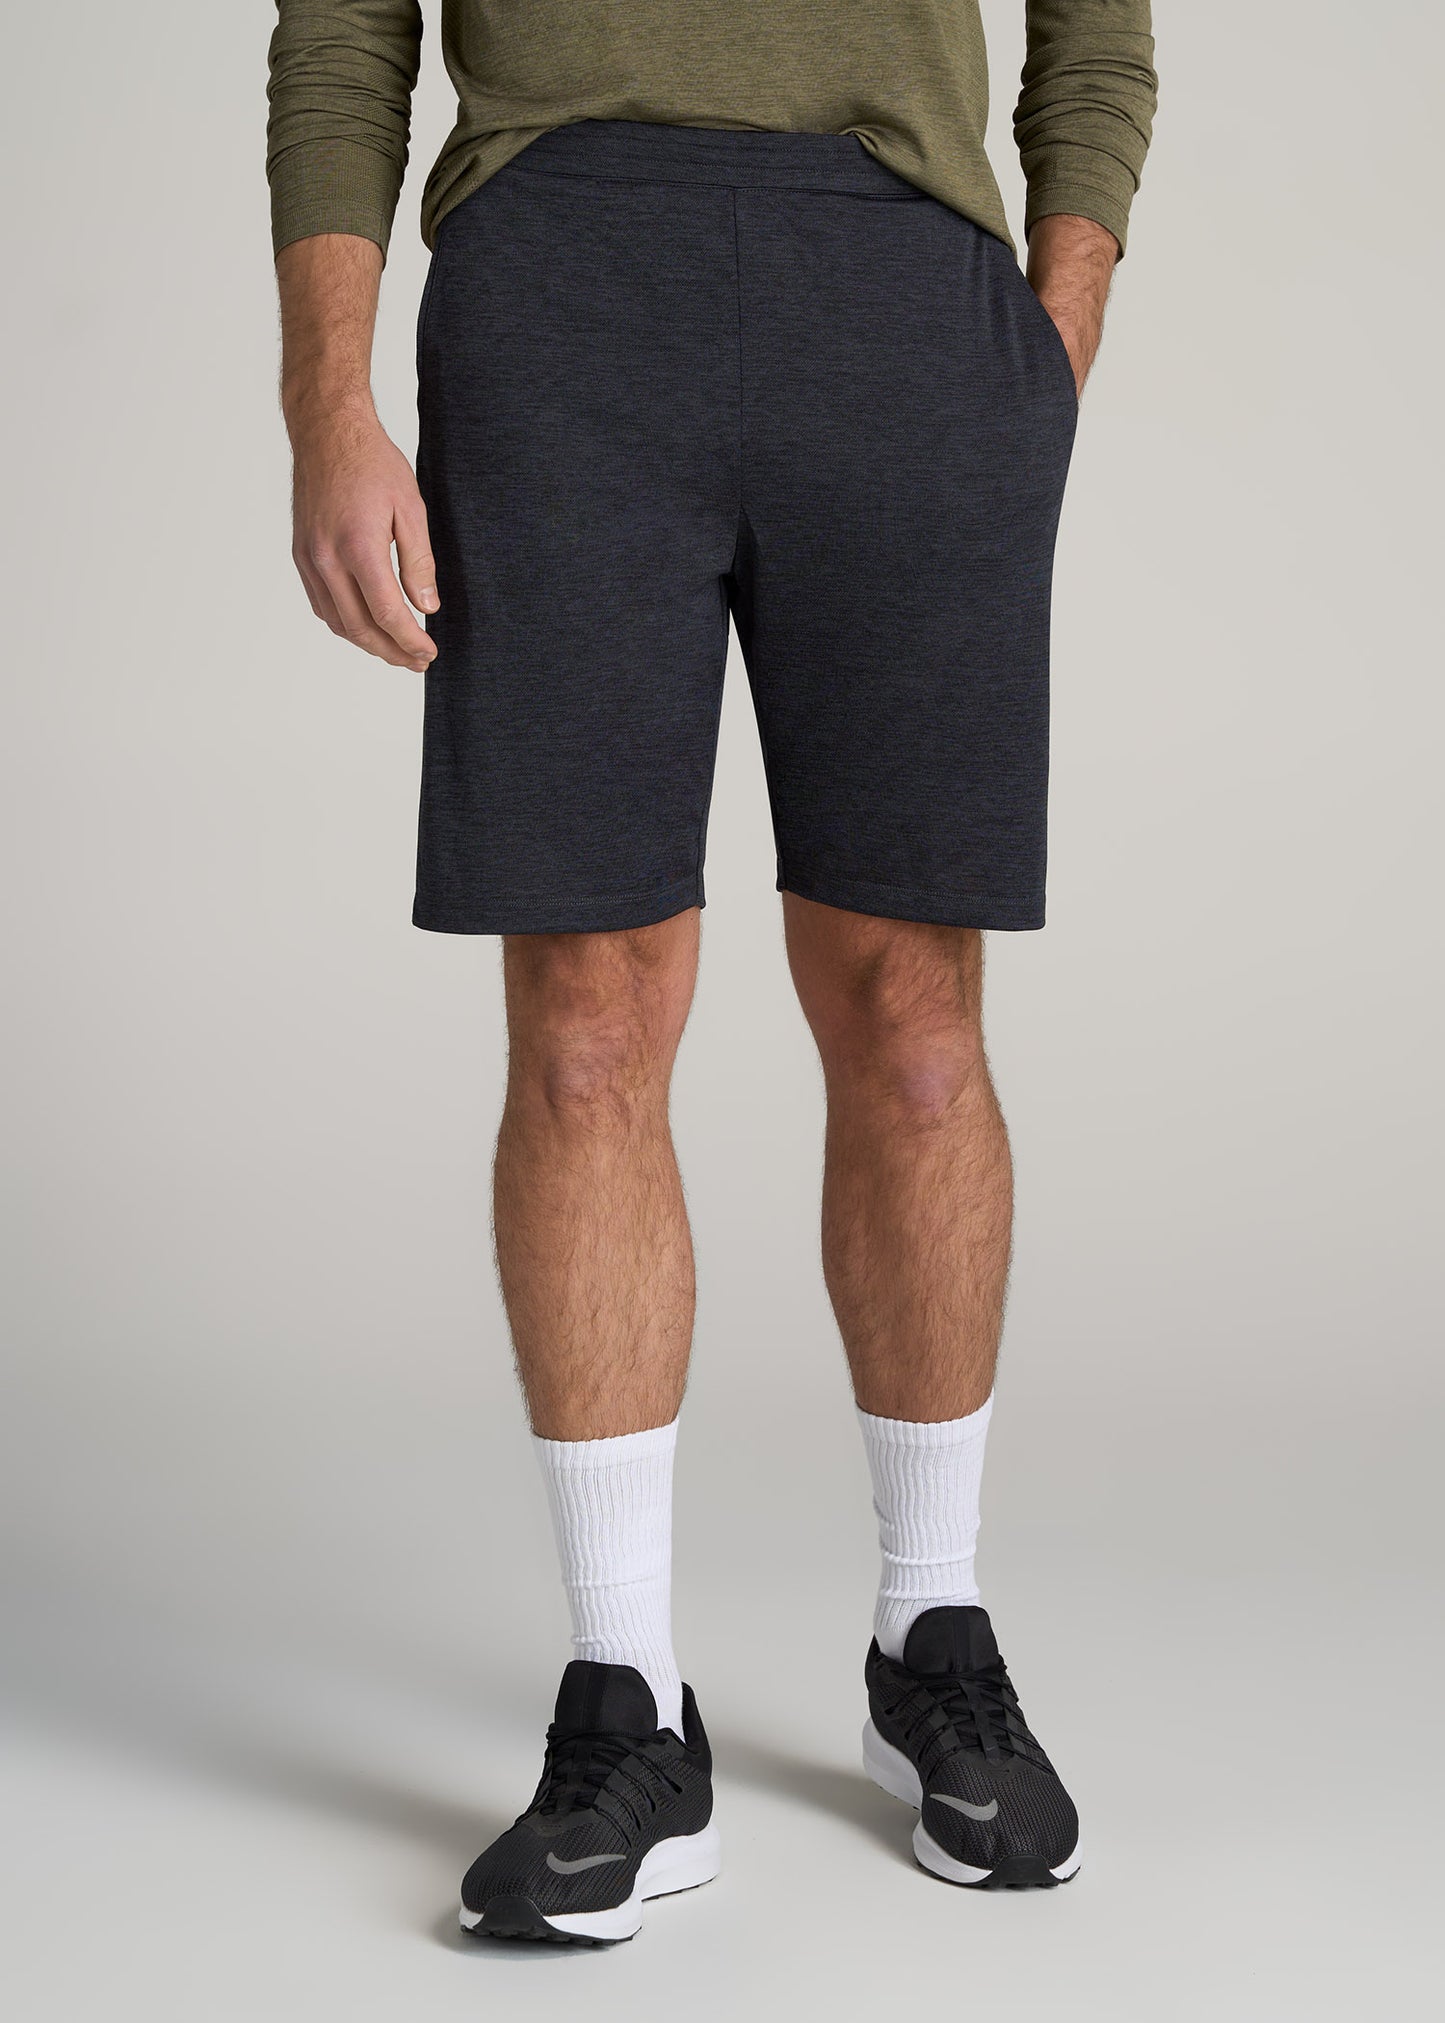       American-Tall-Men-Performance-Engineered-Athletic-Shorts-Charcoal-Mix-front